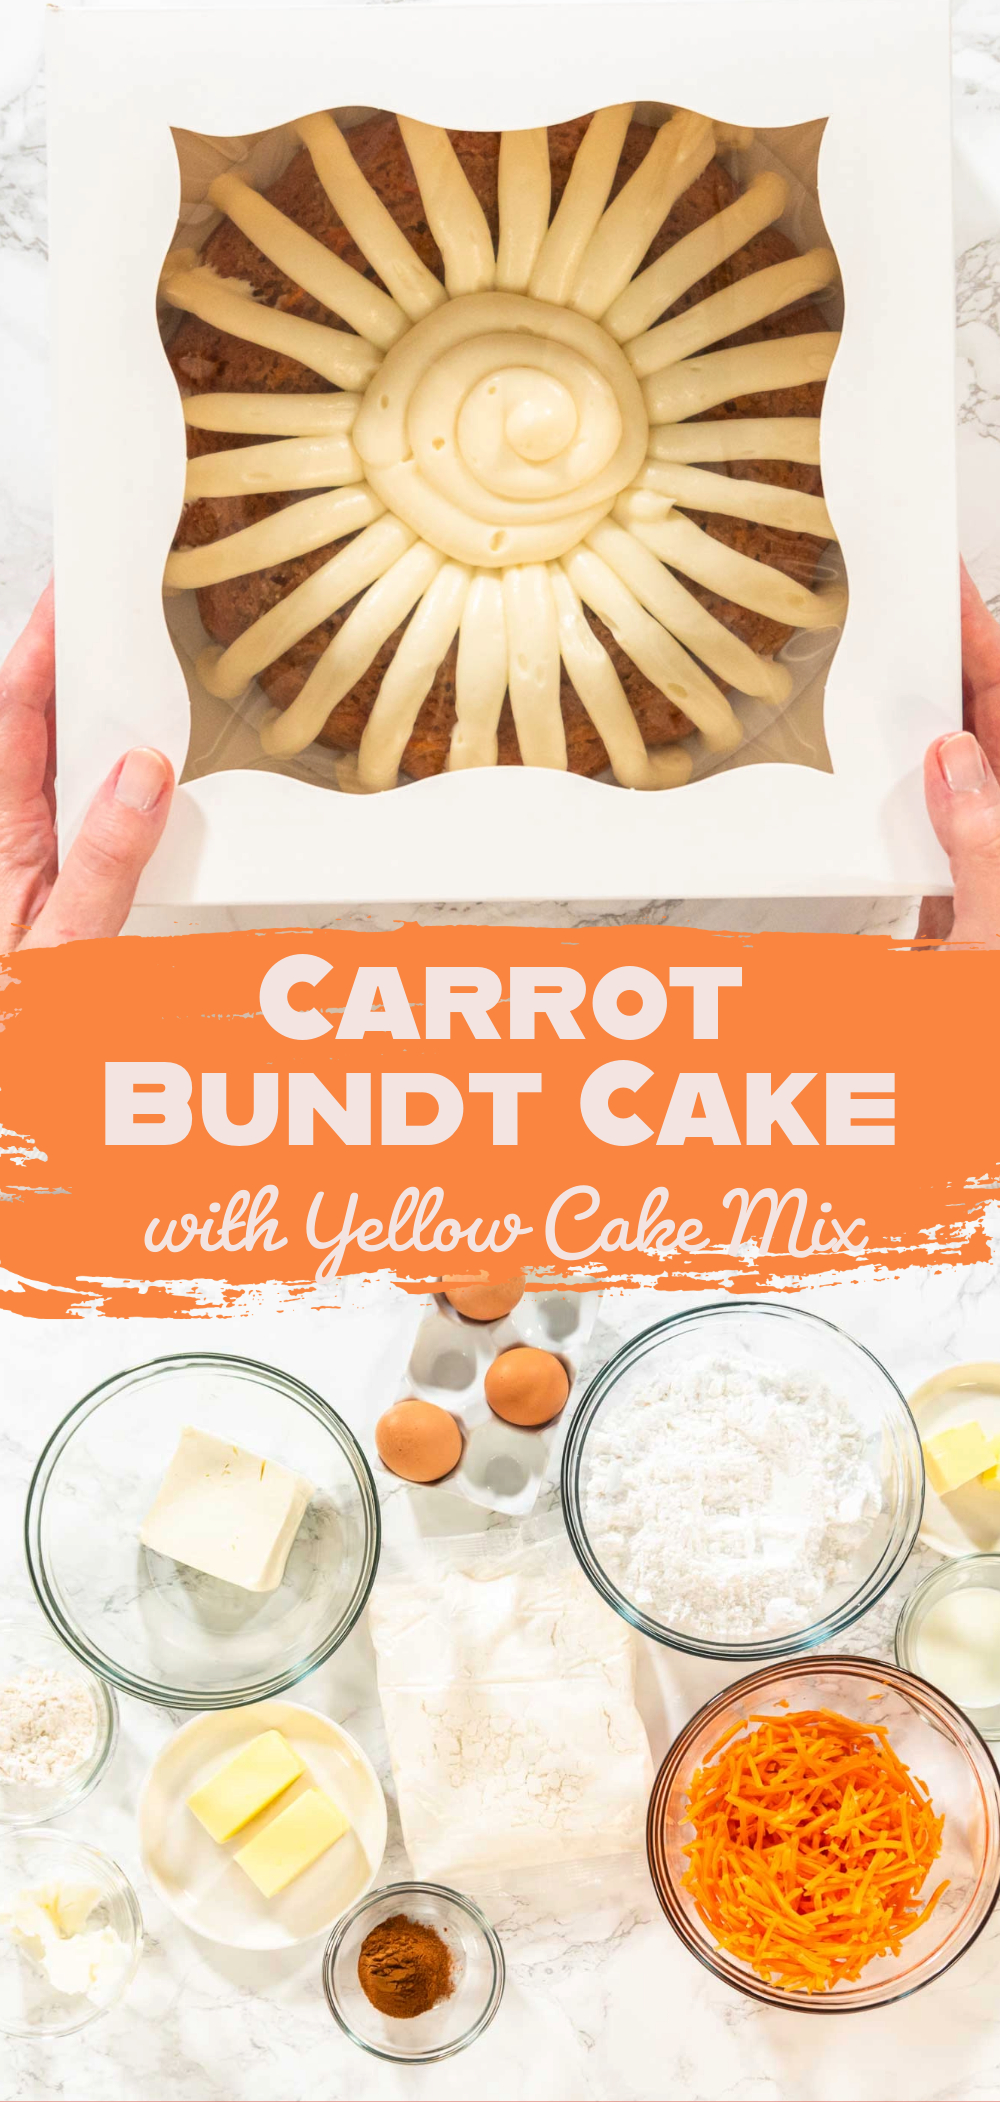 Carrot Bundt Cake From Cake Mix